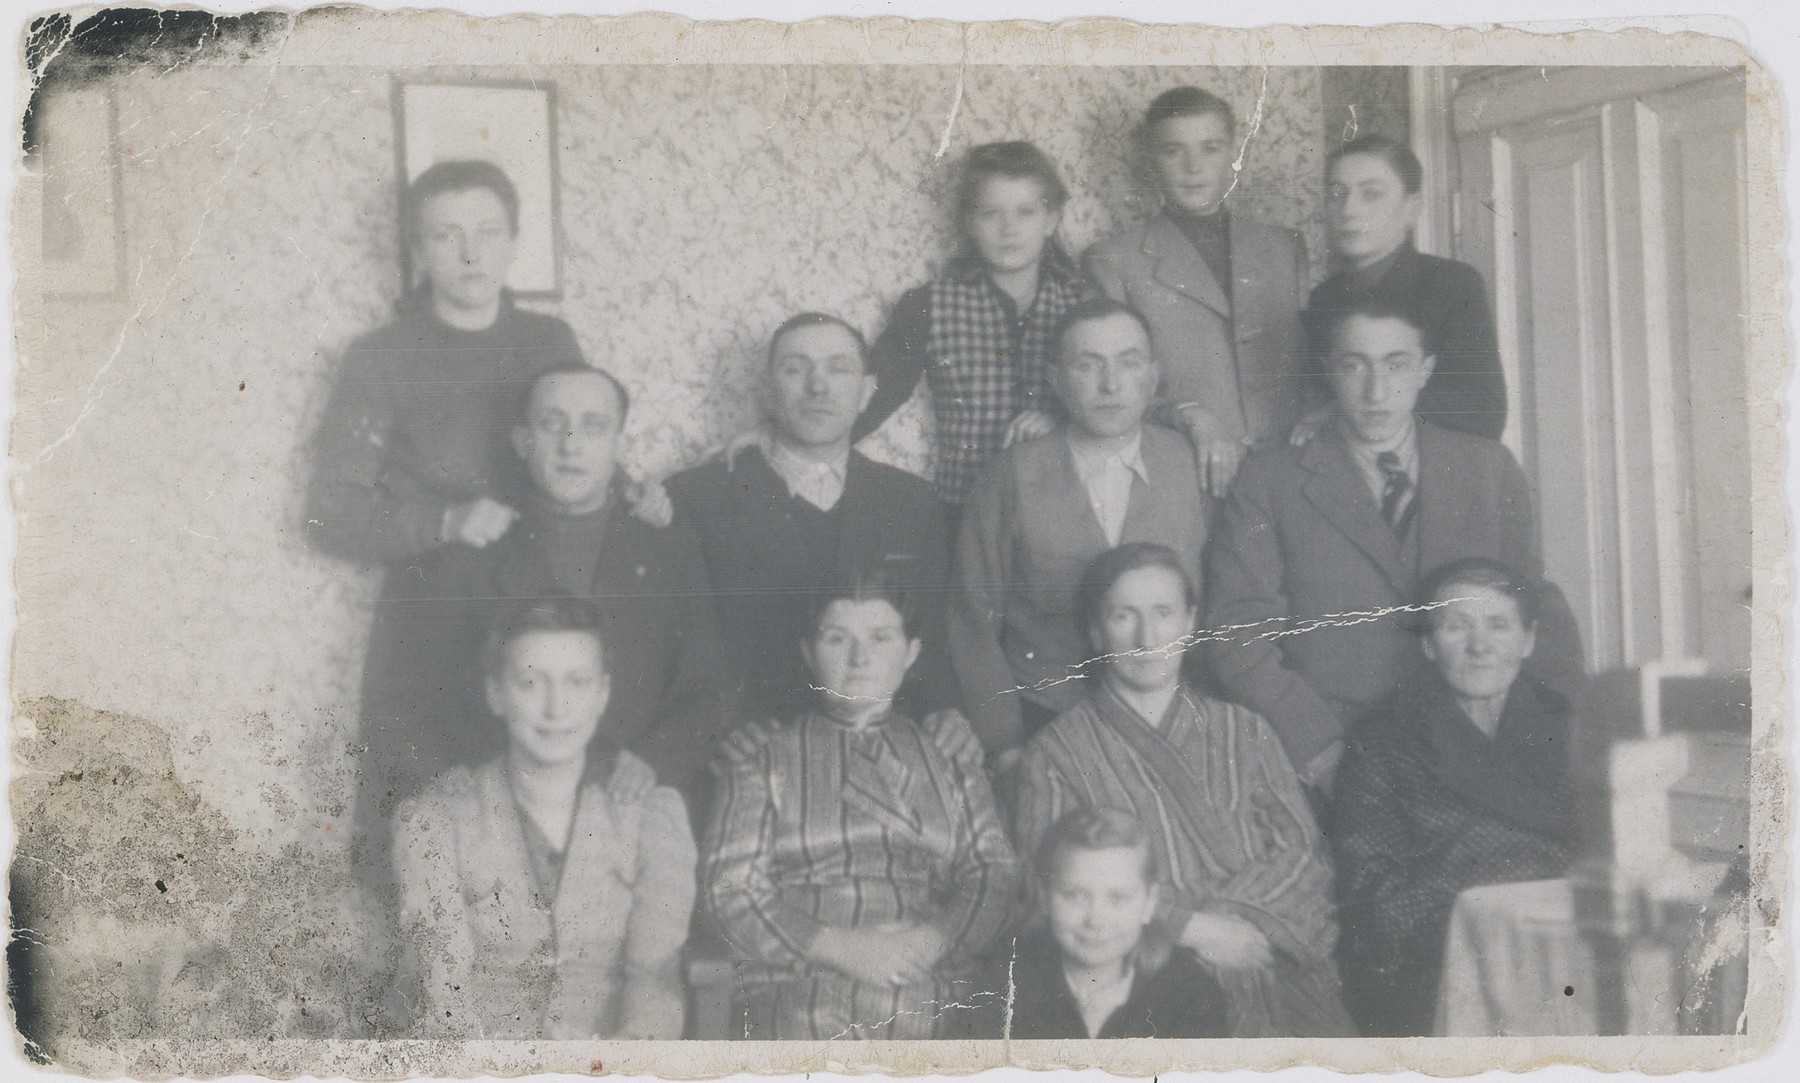 Portrait of the Wierzbicki and Kostanski families in the Warsaw ghetto.

Pictured in the center, front is Danusia.  In the front row from left to right are: Fela, Wladyslawa Wierzbicka, Berkowa, Grandma Bajla.  In the second row from the front, from left to right are: Szmulek, Ajzyk, Berek, Jakob.  In the top row from left to right are: Nacha, Jadzia, Jan and Nathan.